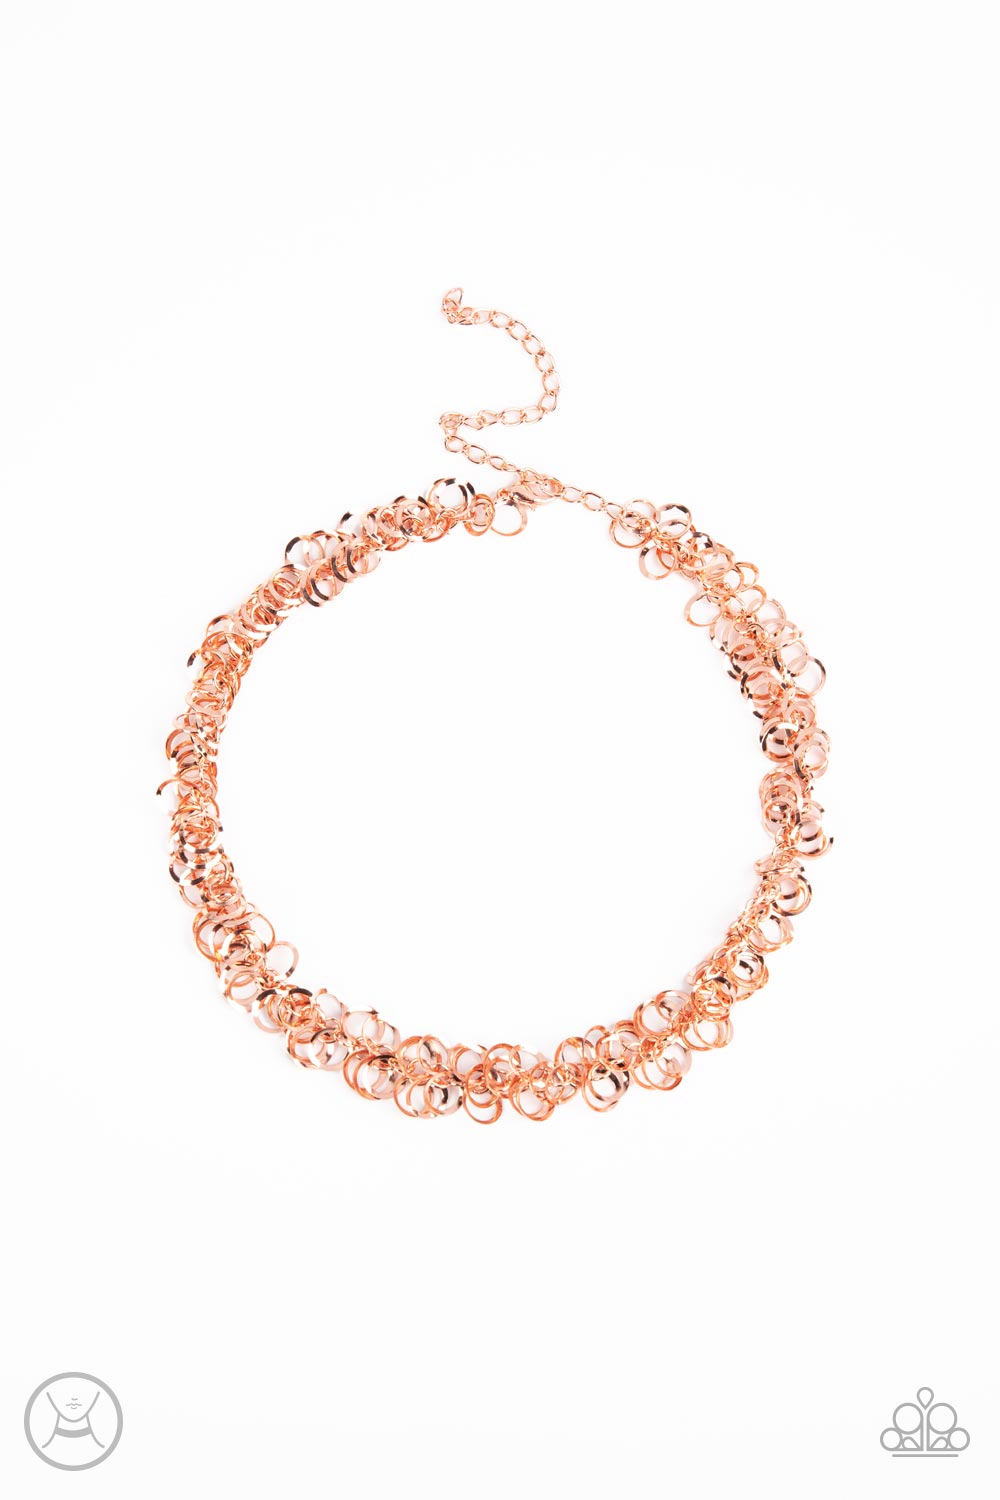 Cause a Commotion - copper - Paparazzi necklace